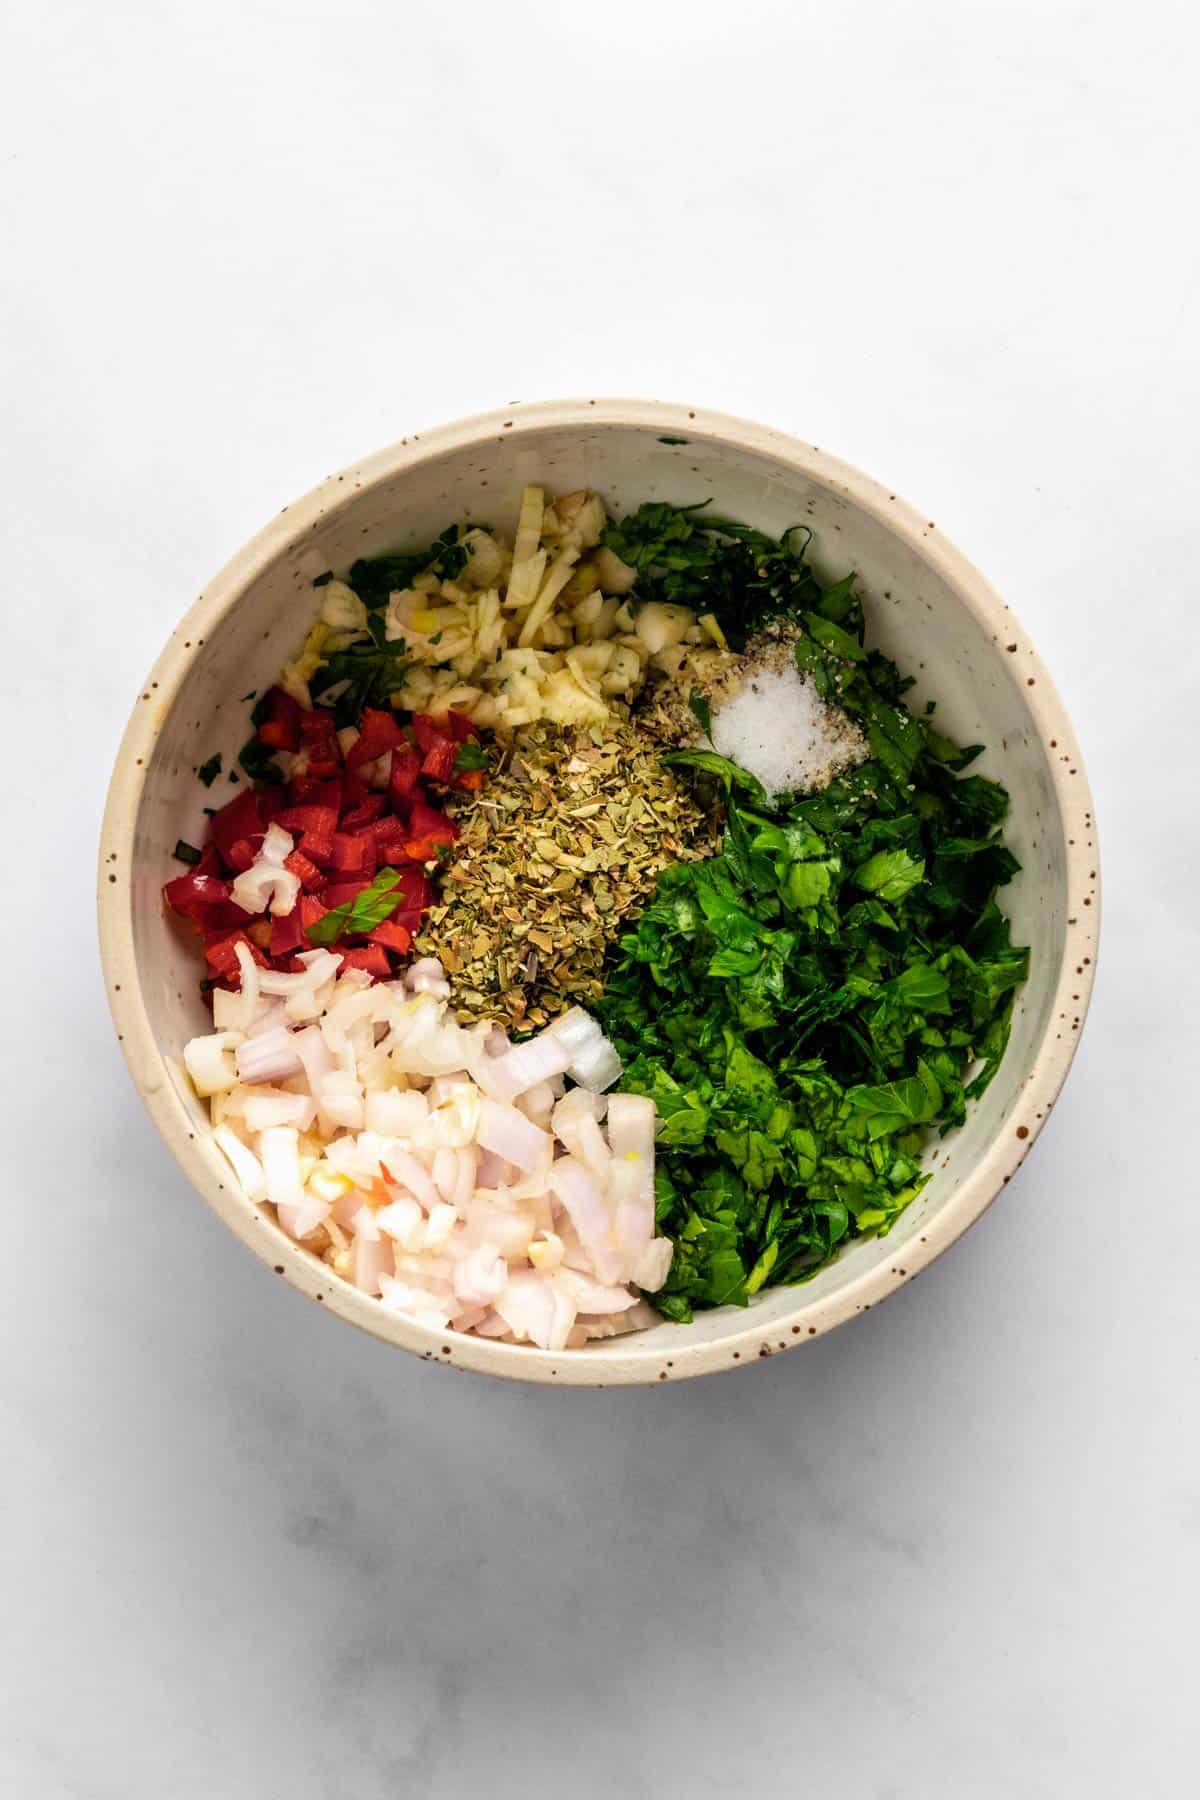 all ingredients for chimichurri sauce in a bowl before mixing